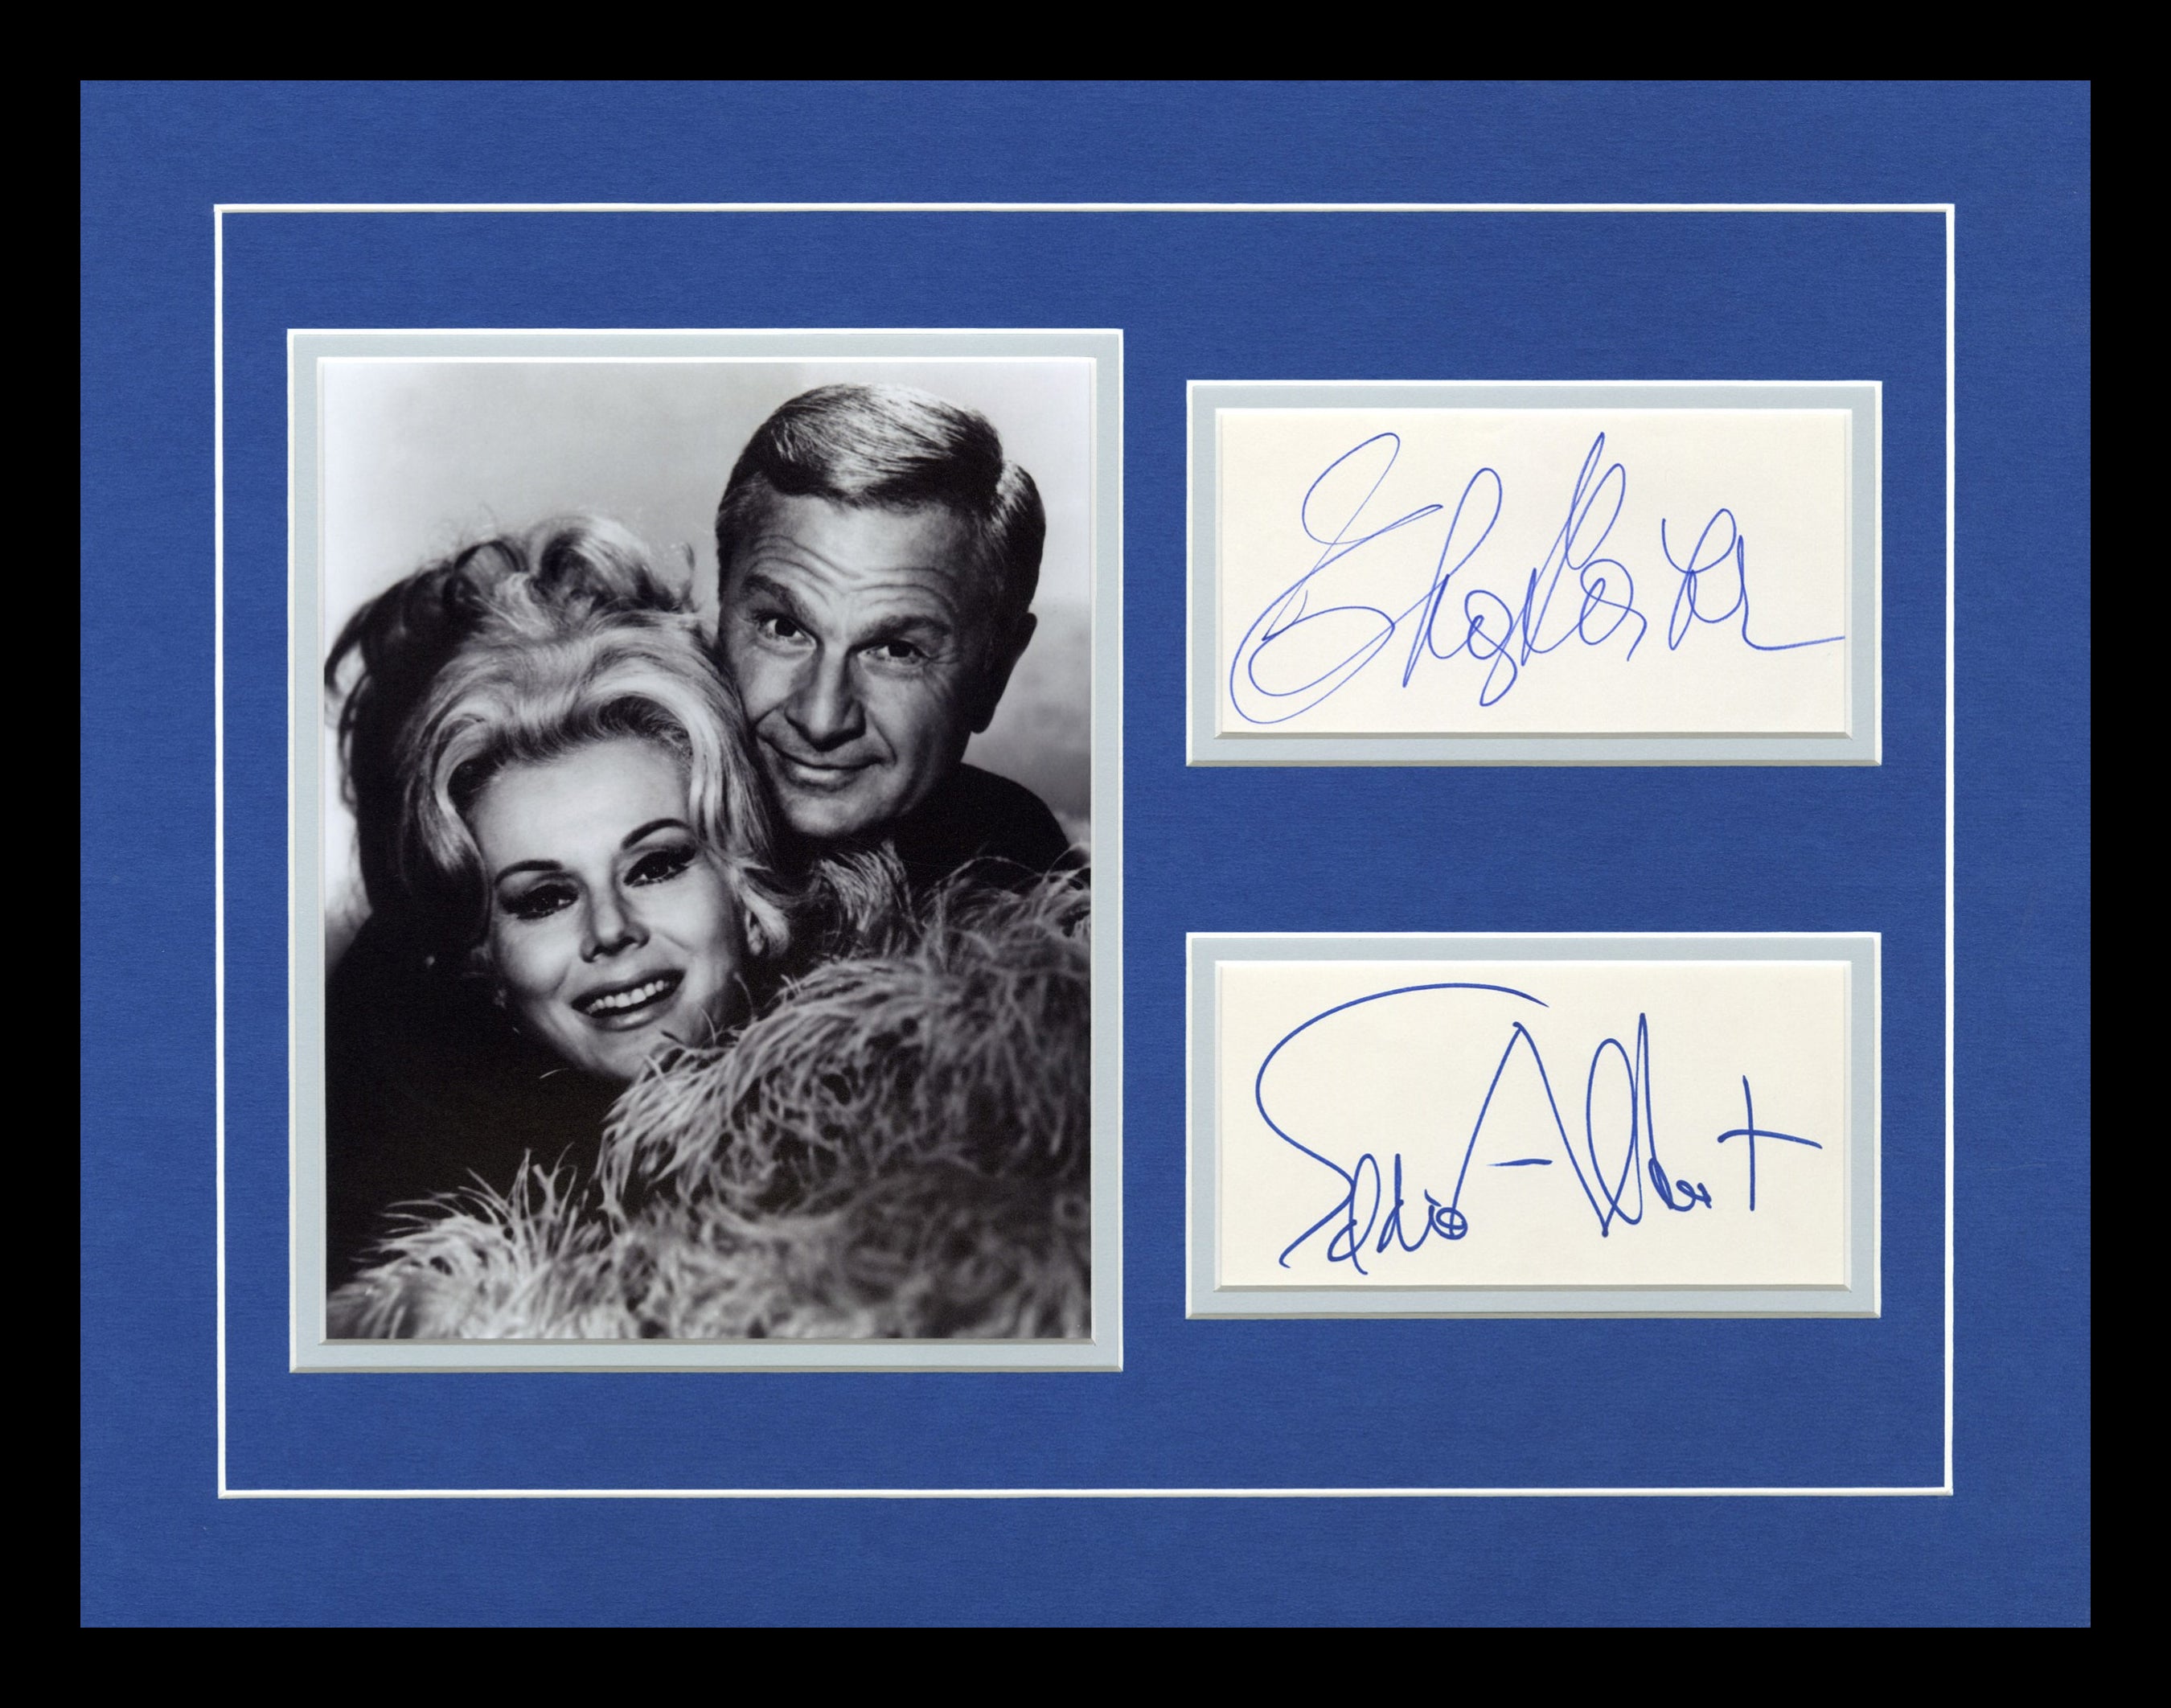 Green Acres Autographed Display